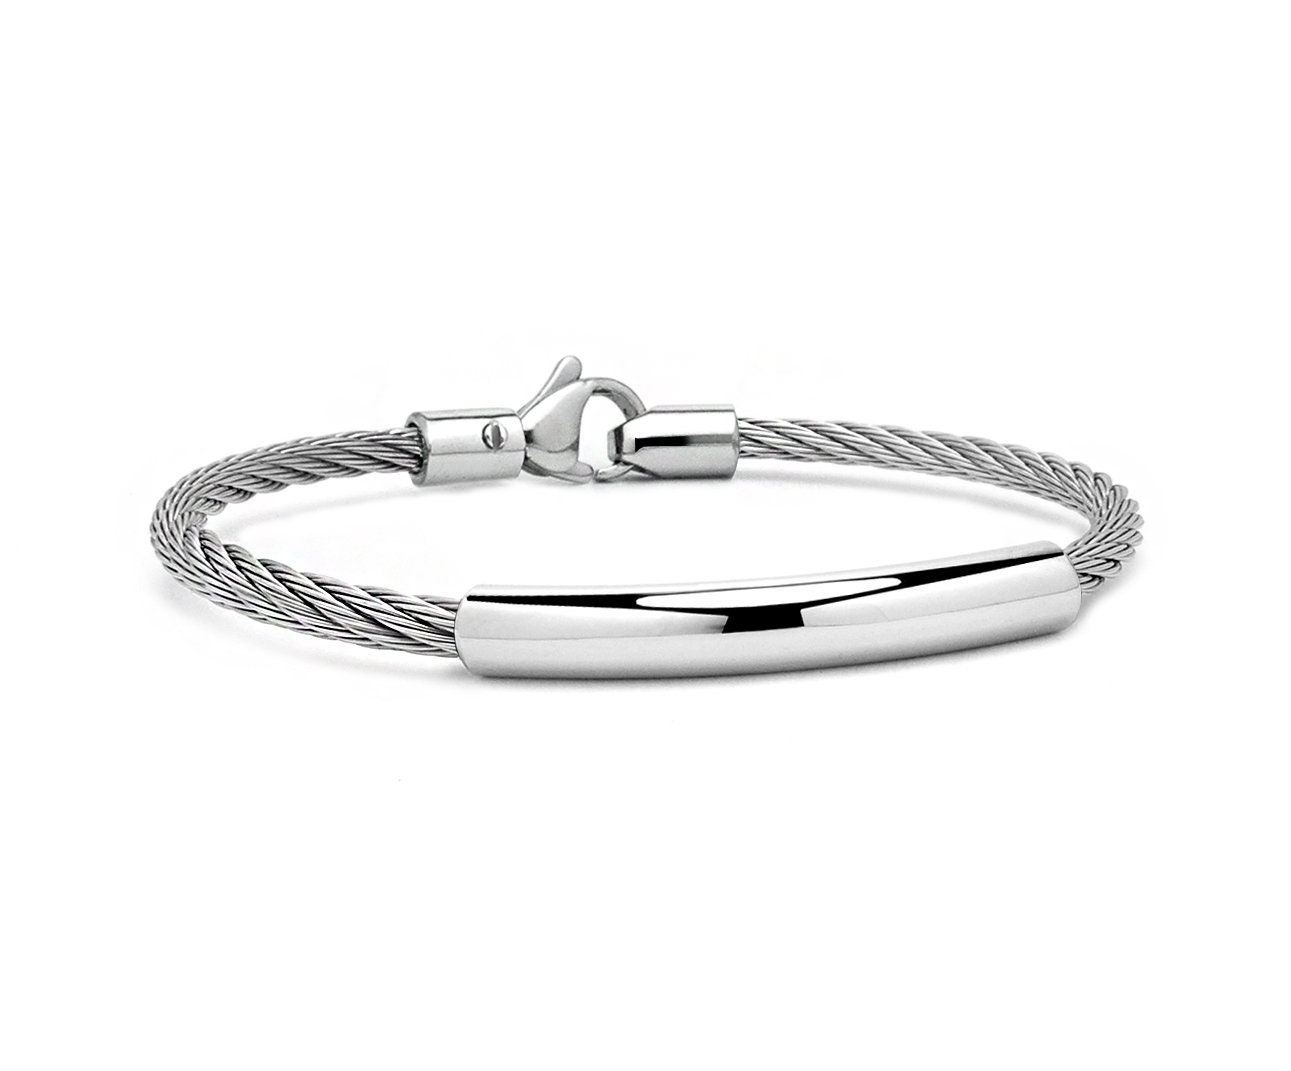 4mm Stainless Steel ID Cable Wire Bracelet by Taormina Jewelry